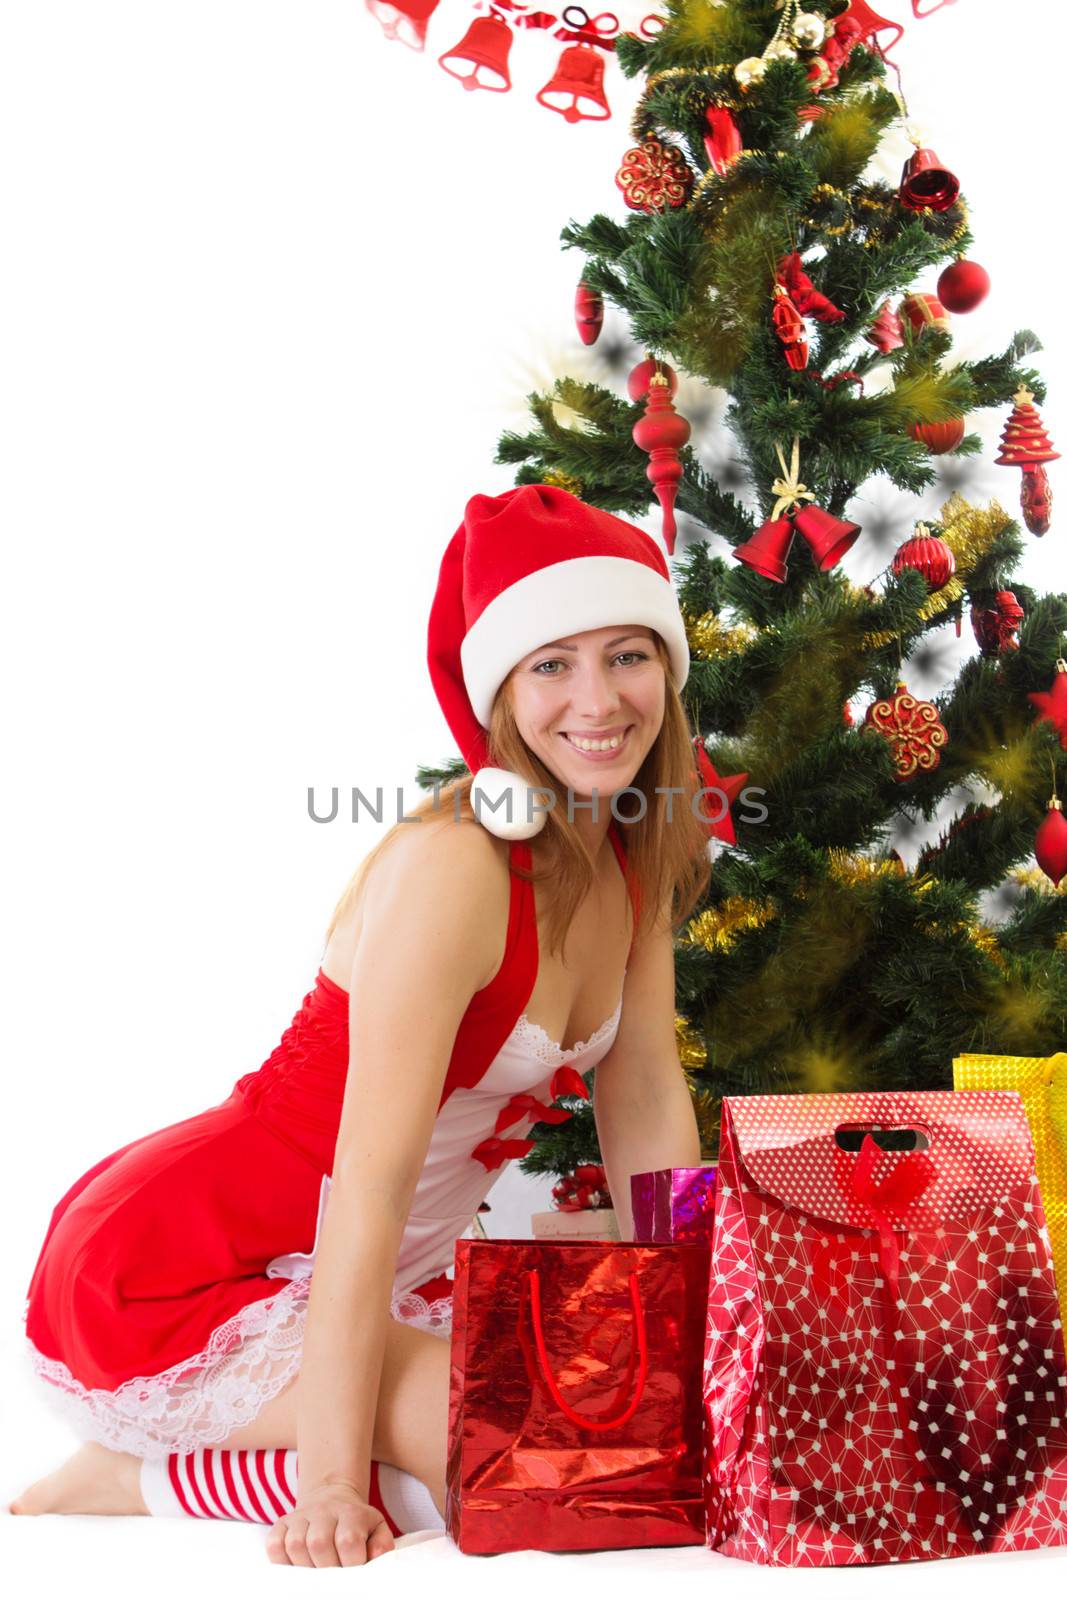 Smiling woman in red sitting under Christmas tree with gifts